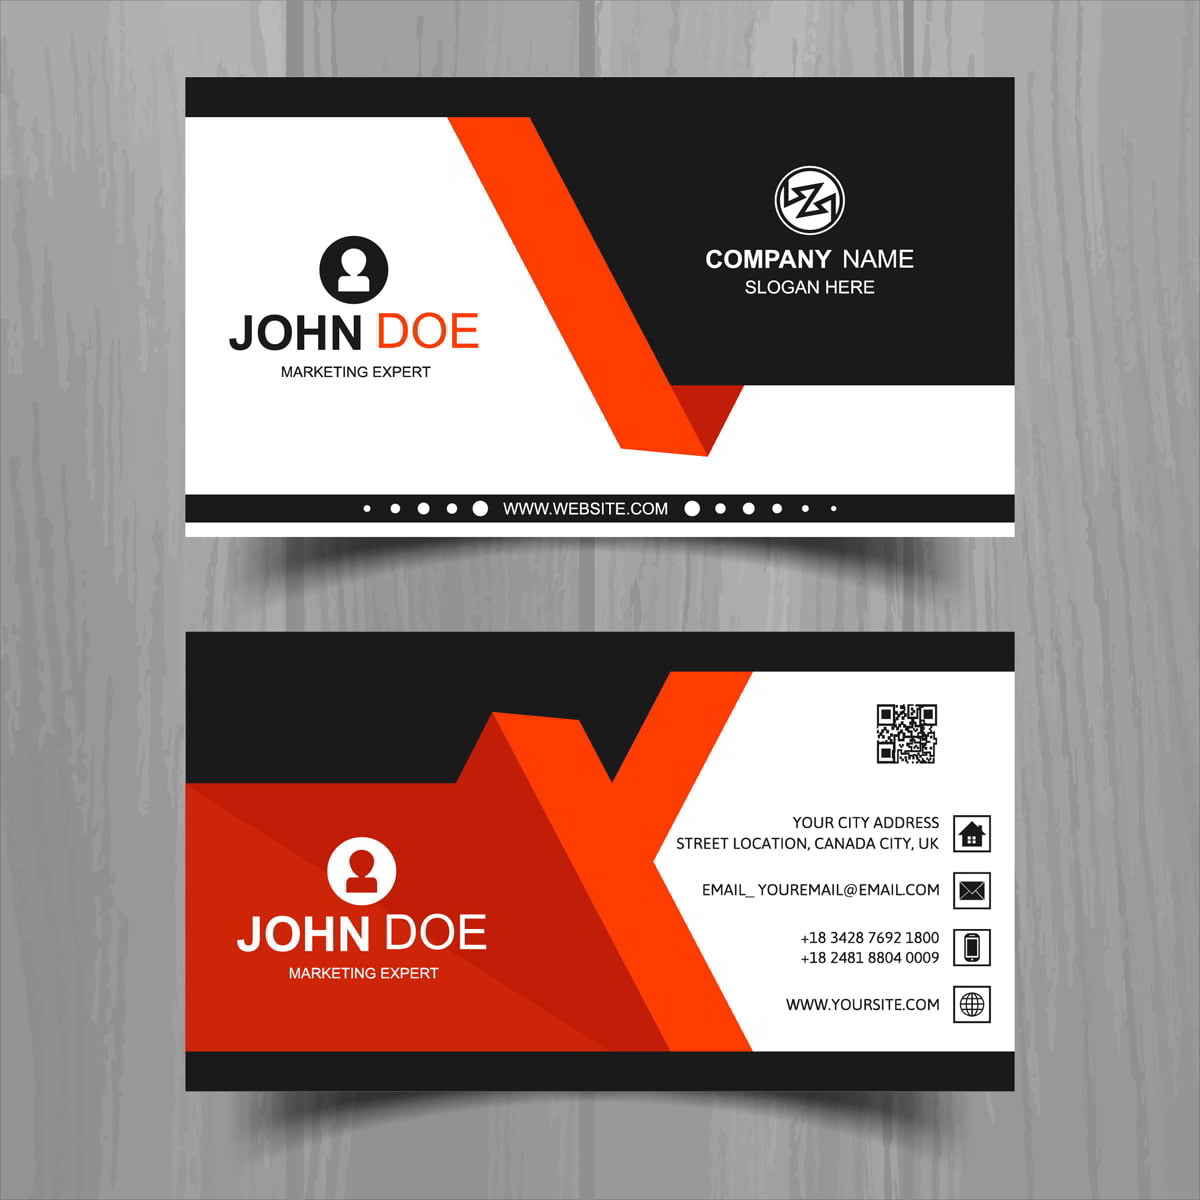 Abstract Stylish Wave Business Card Template Design Free Vector